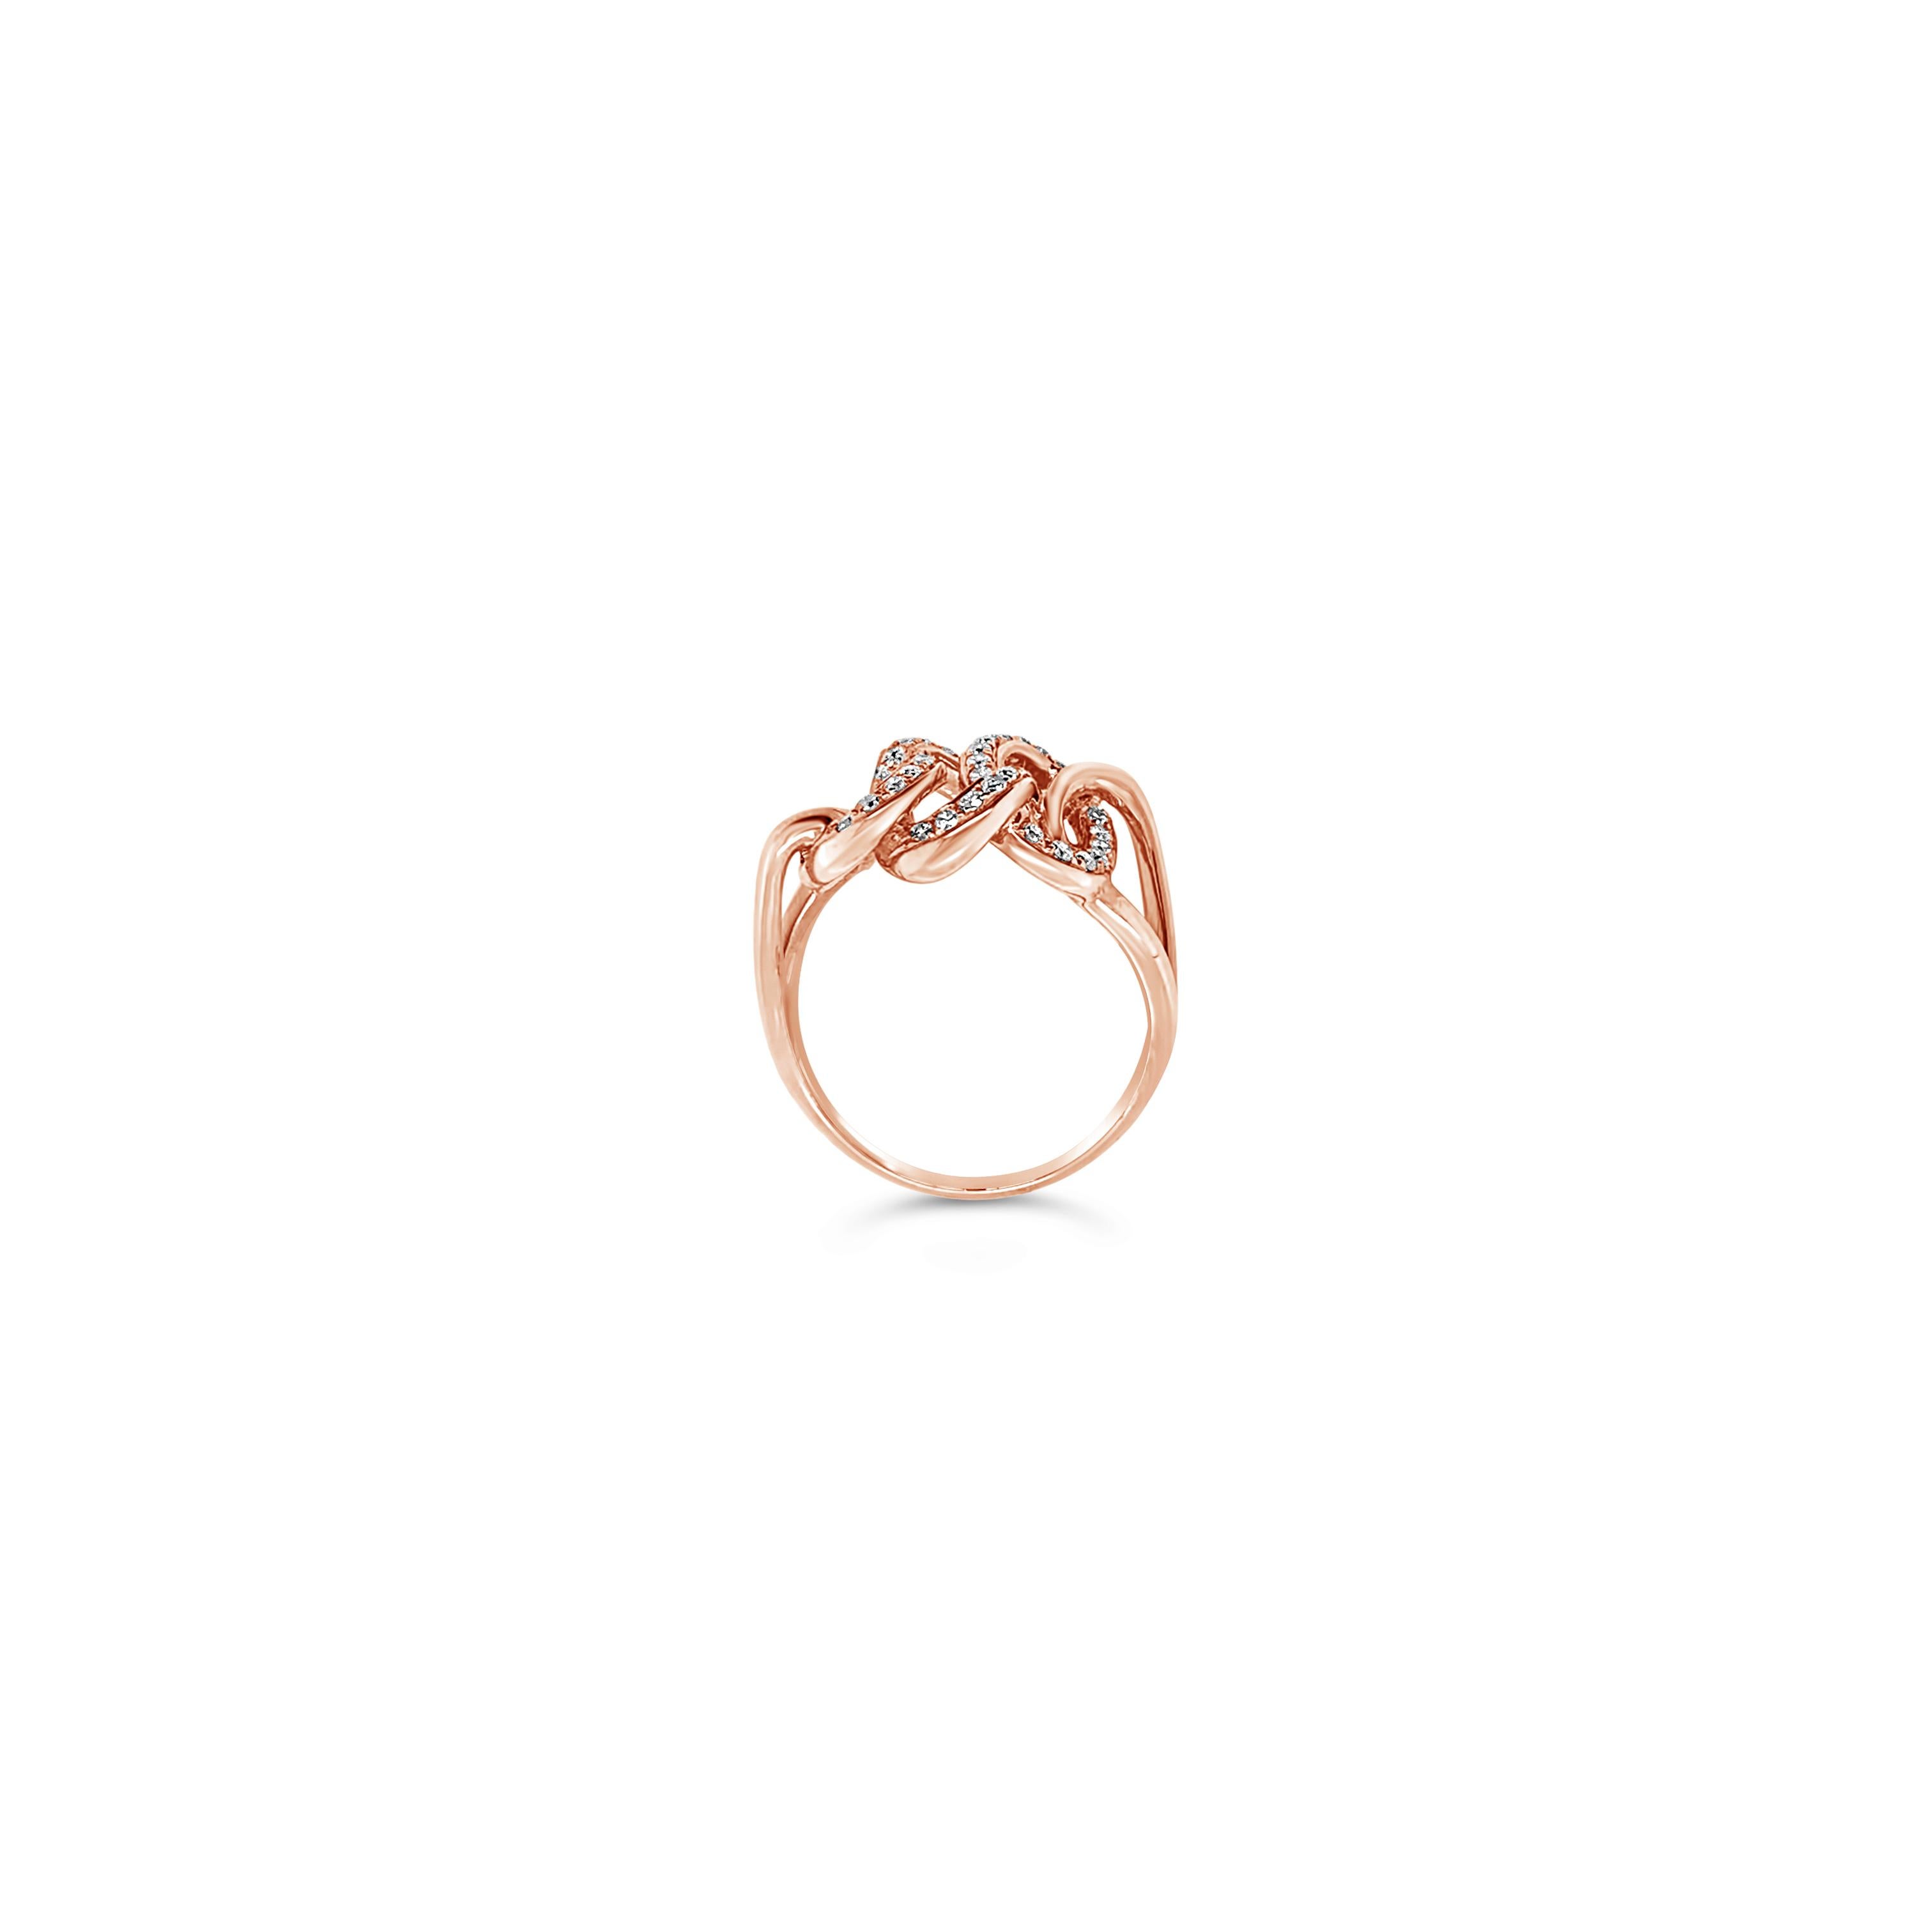 Le Vian® Ring featuring 3/8 cts. Vanilla Diamonds® set in 14K Strawberry Gold®

Diamonds Breakdown:
3/8 cts White Diamonds

Gems Breakdown:
None

Please feel free to reach out with any questions!

Item comes with a Le Vian® jewelry box as well as a